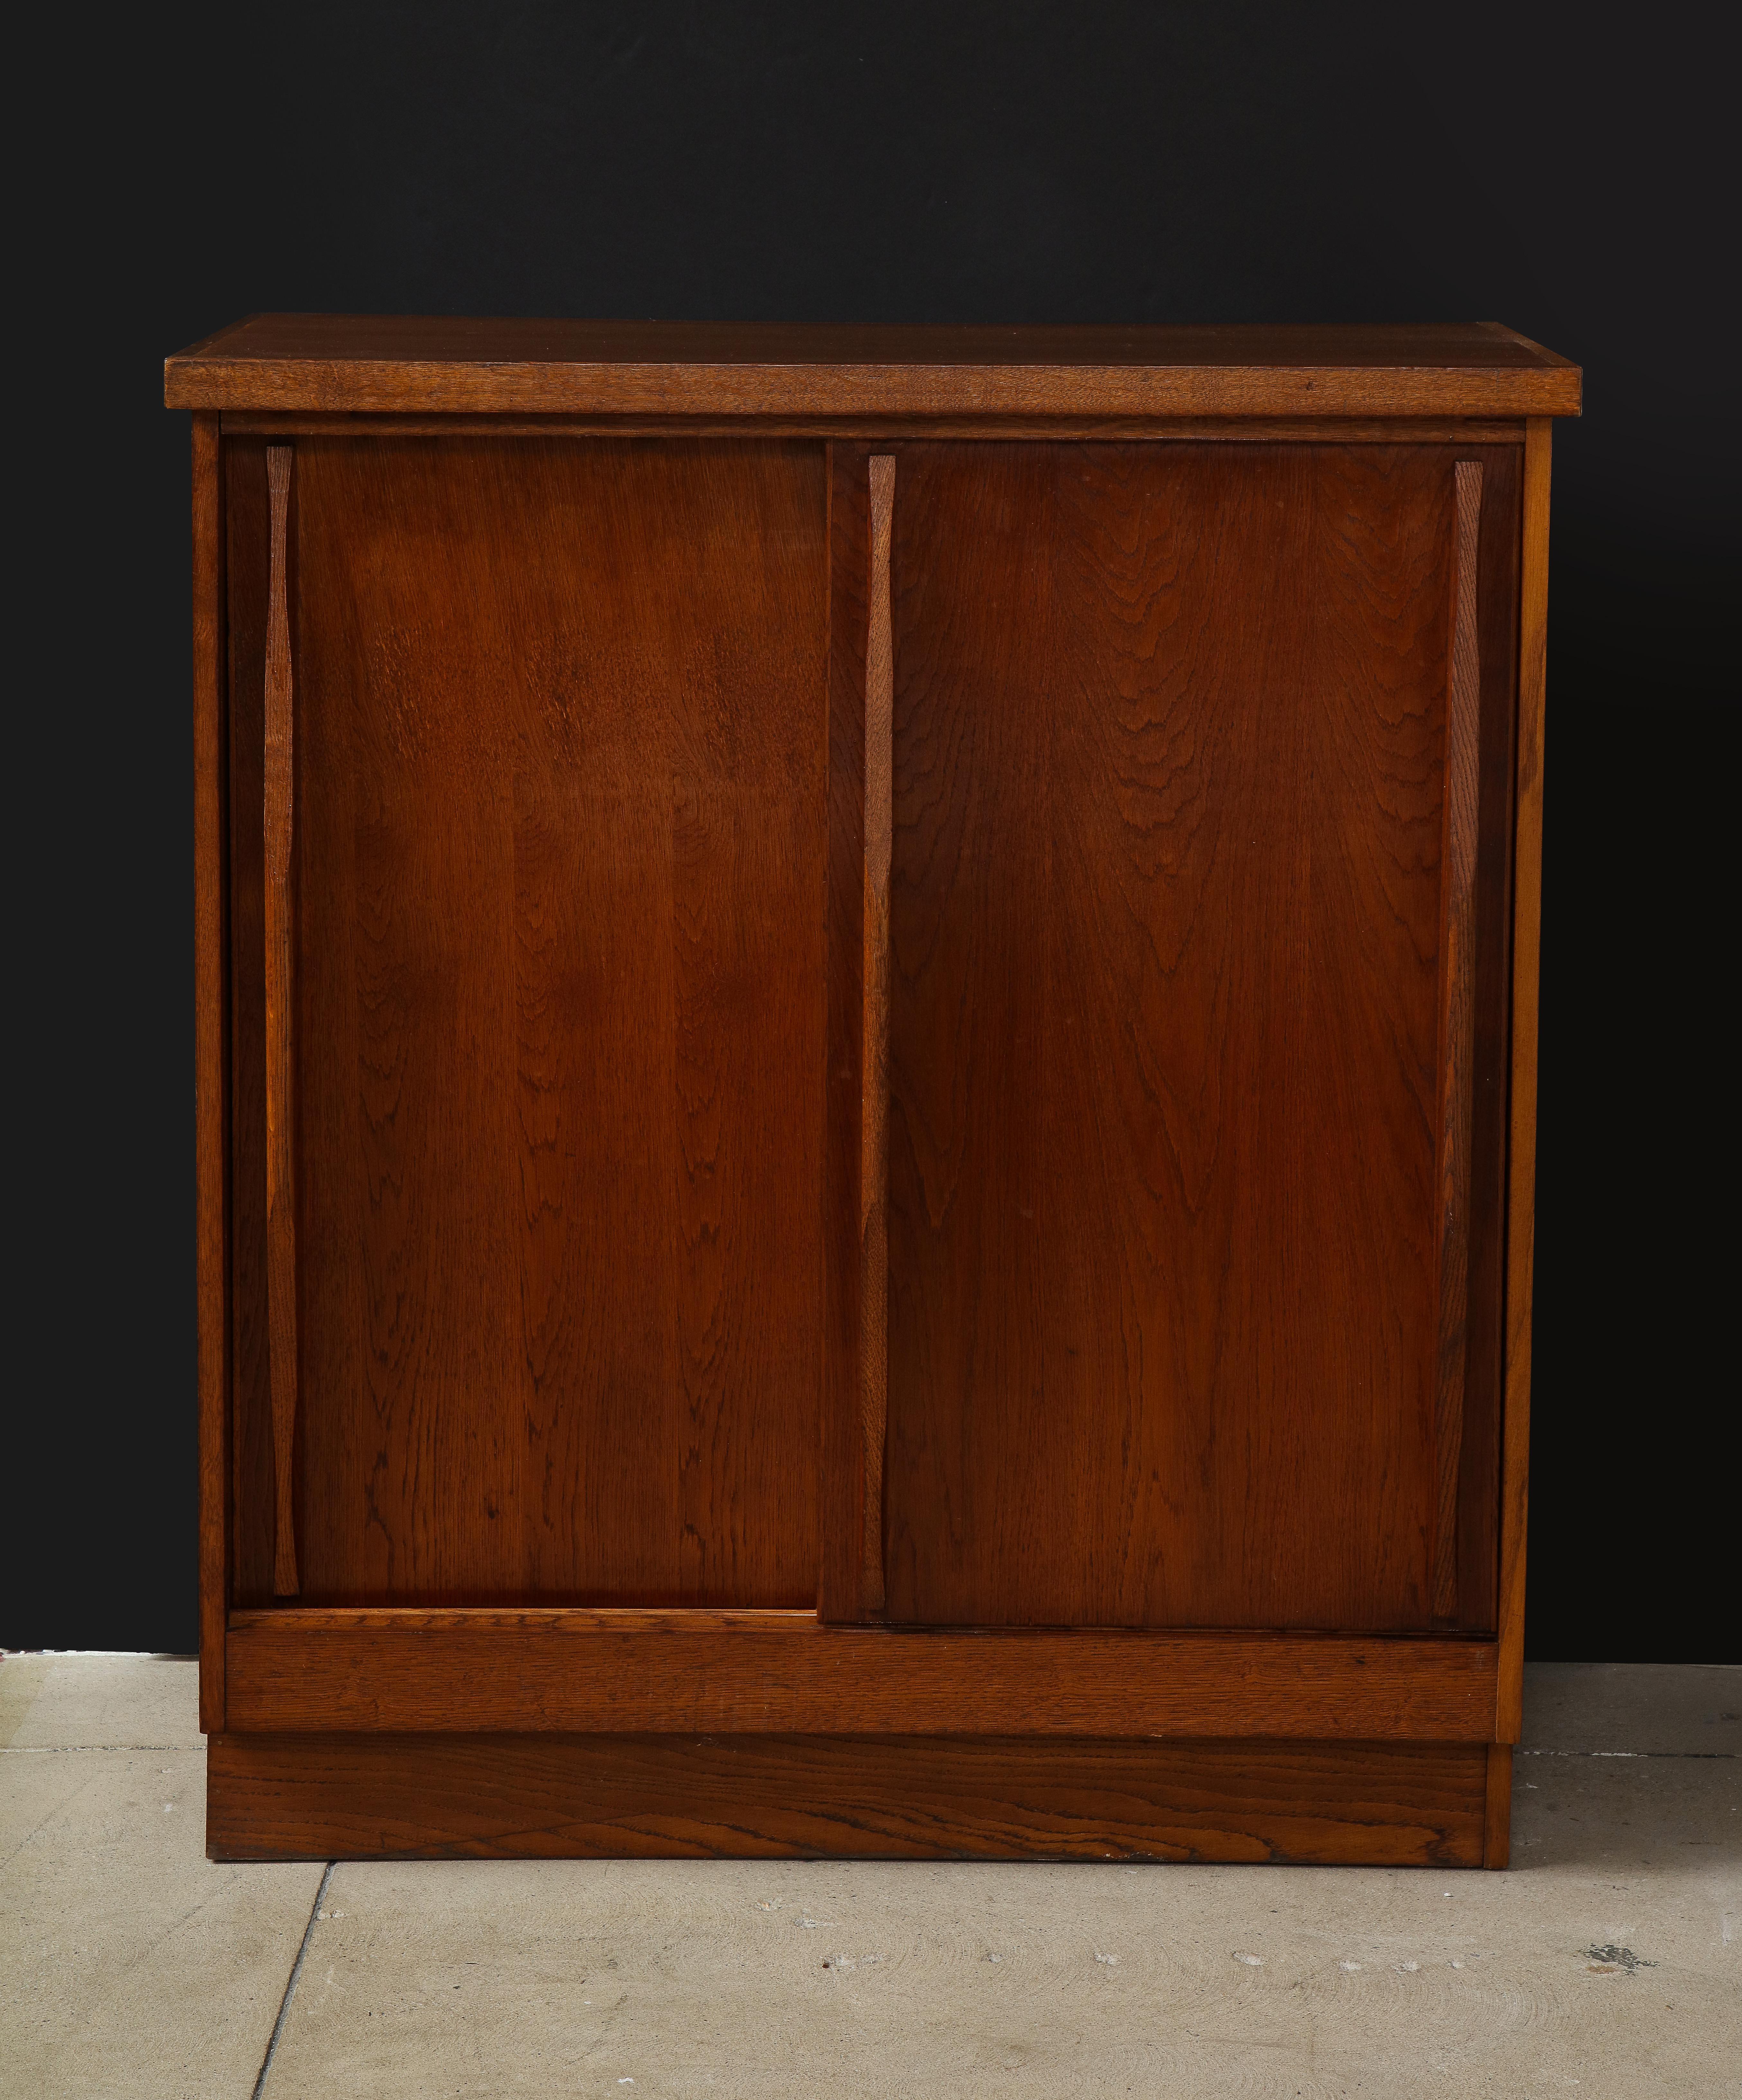 upright cabinet with doors